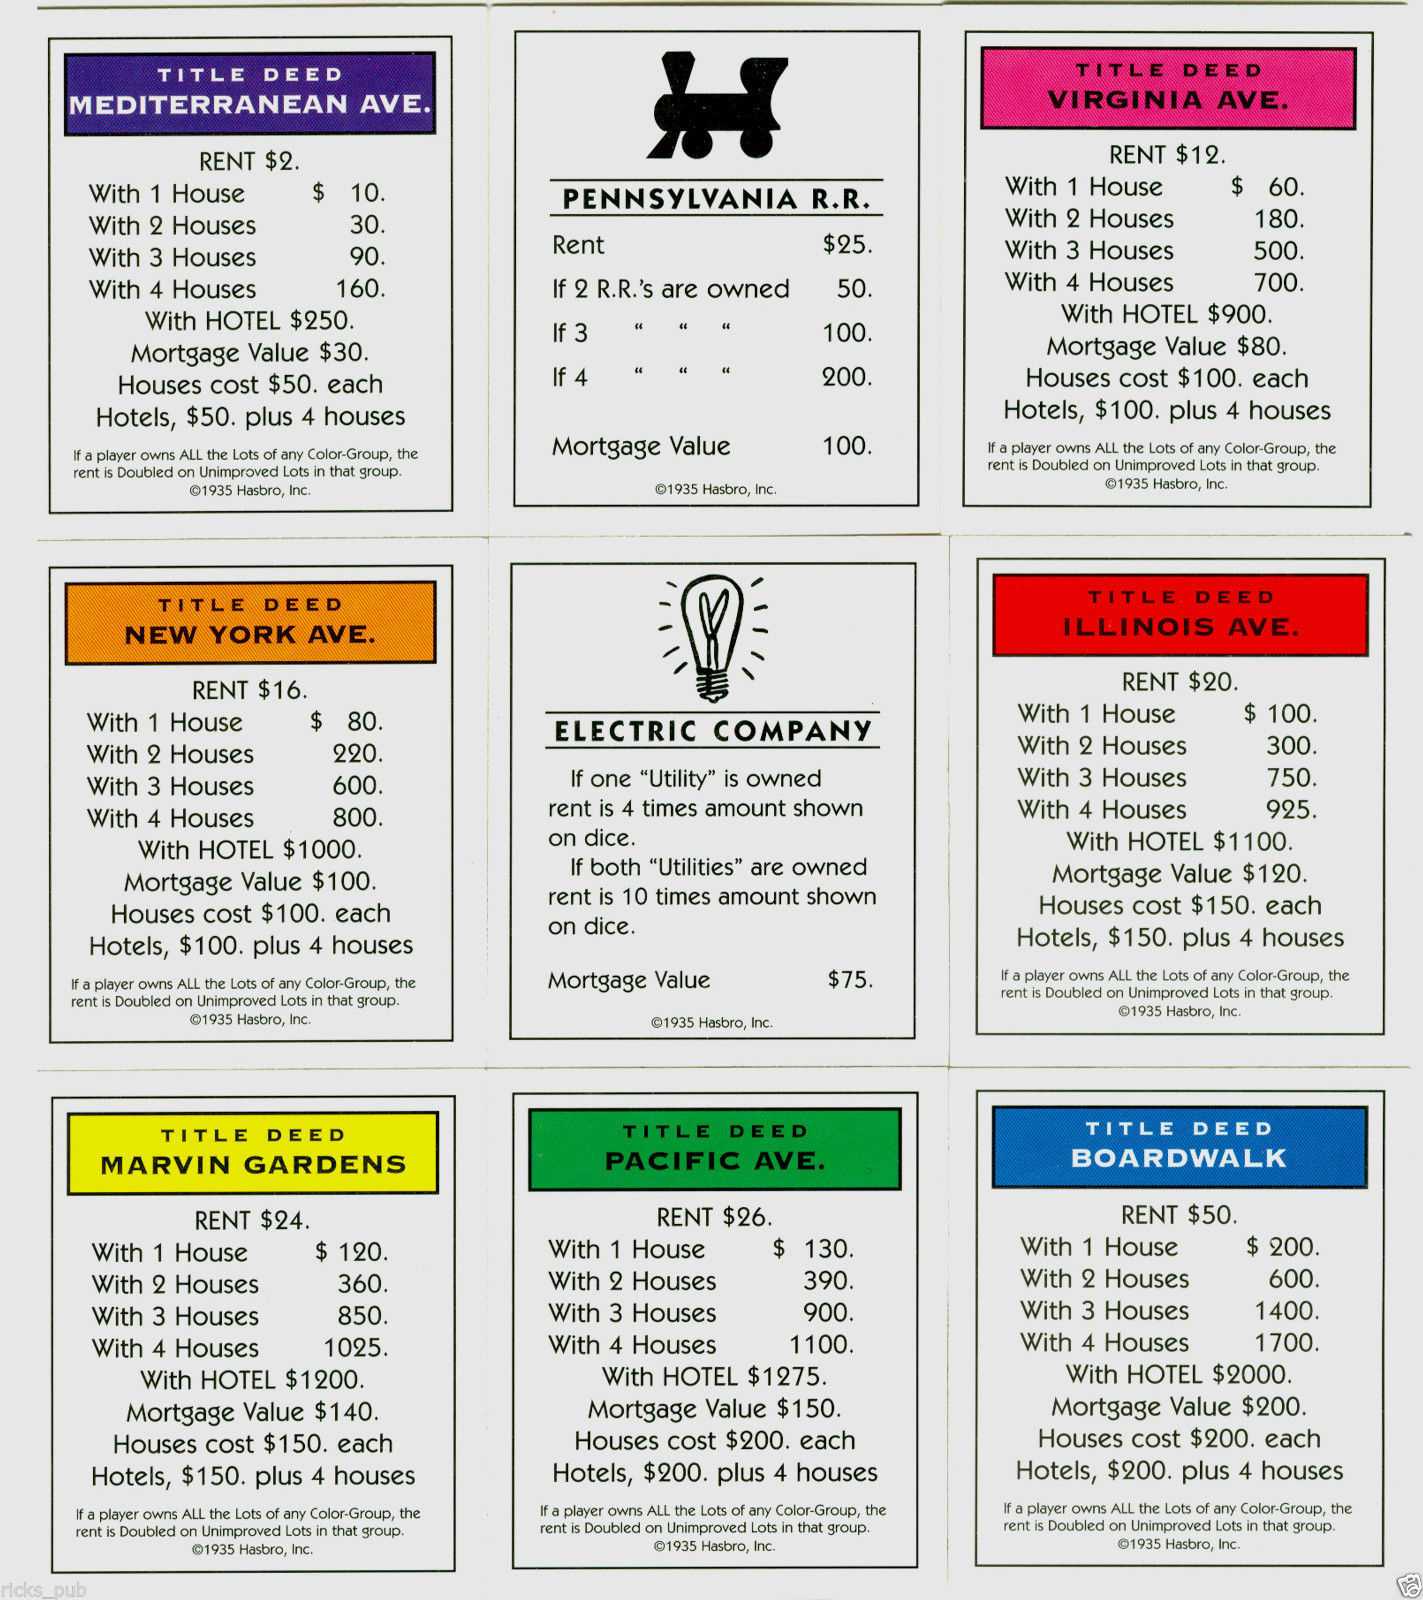 1C1 Monopoly Chance Card Template | Wiring Library With Monopoly Chance Cards Template